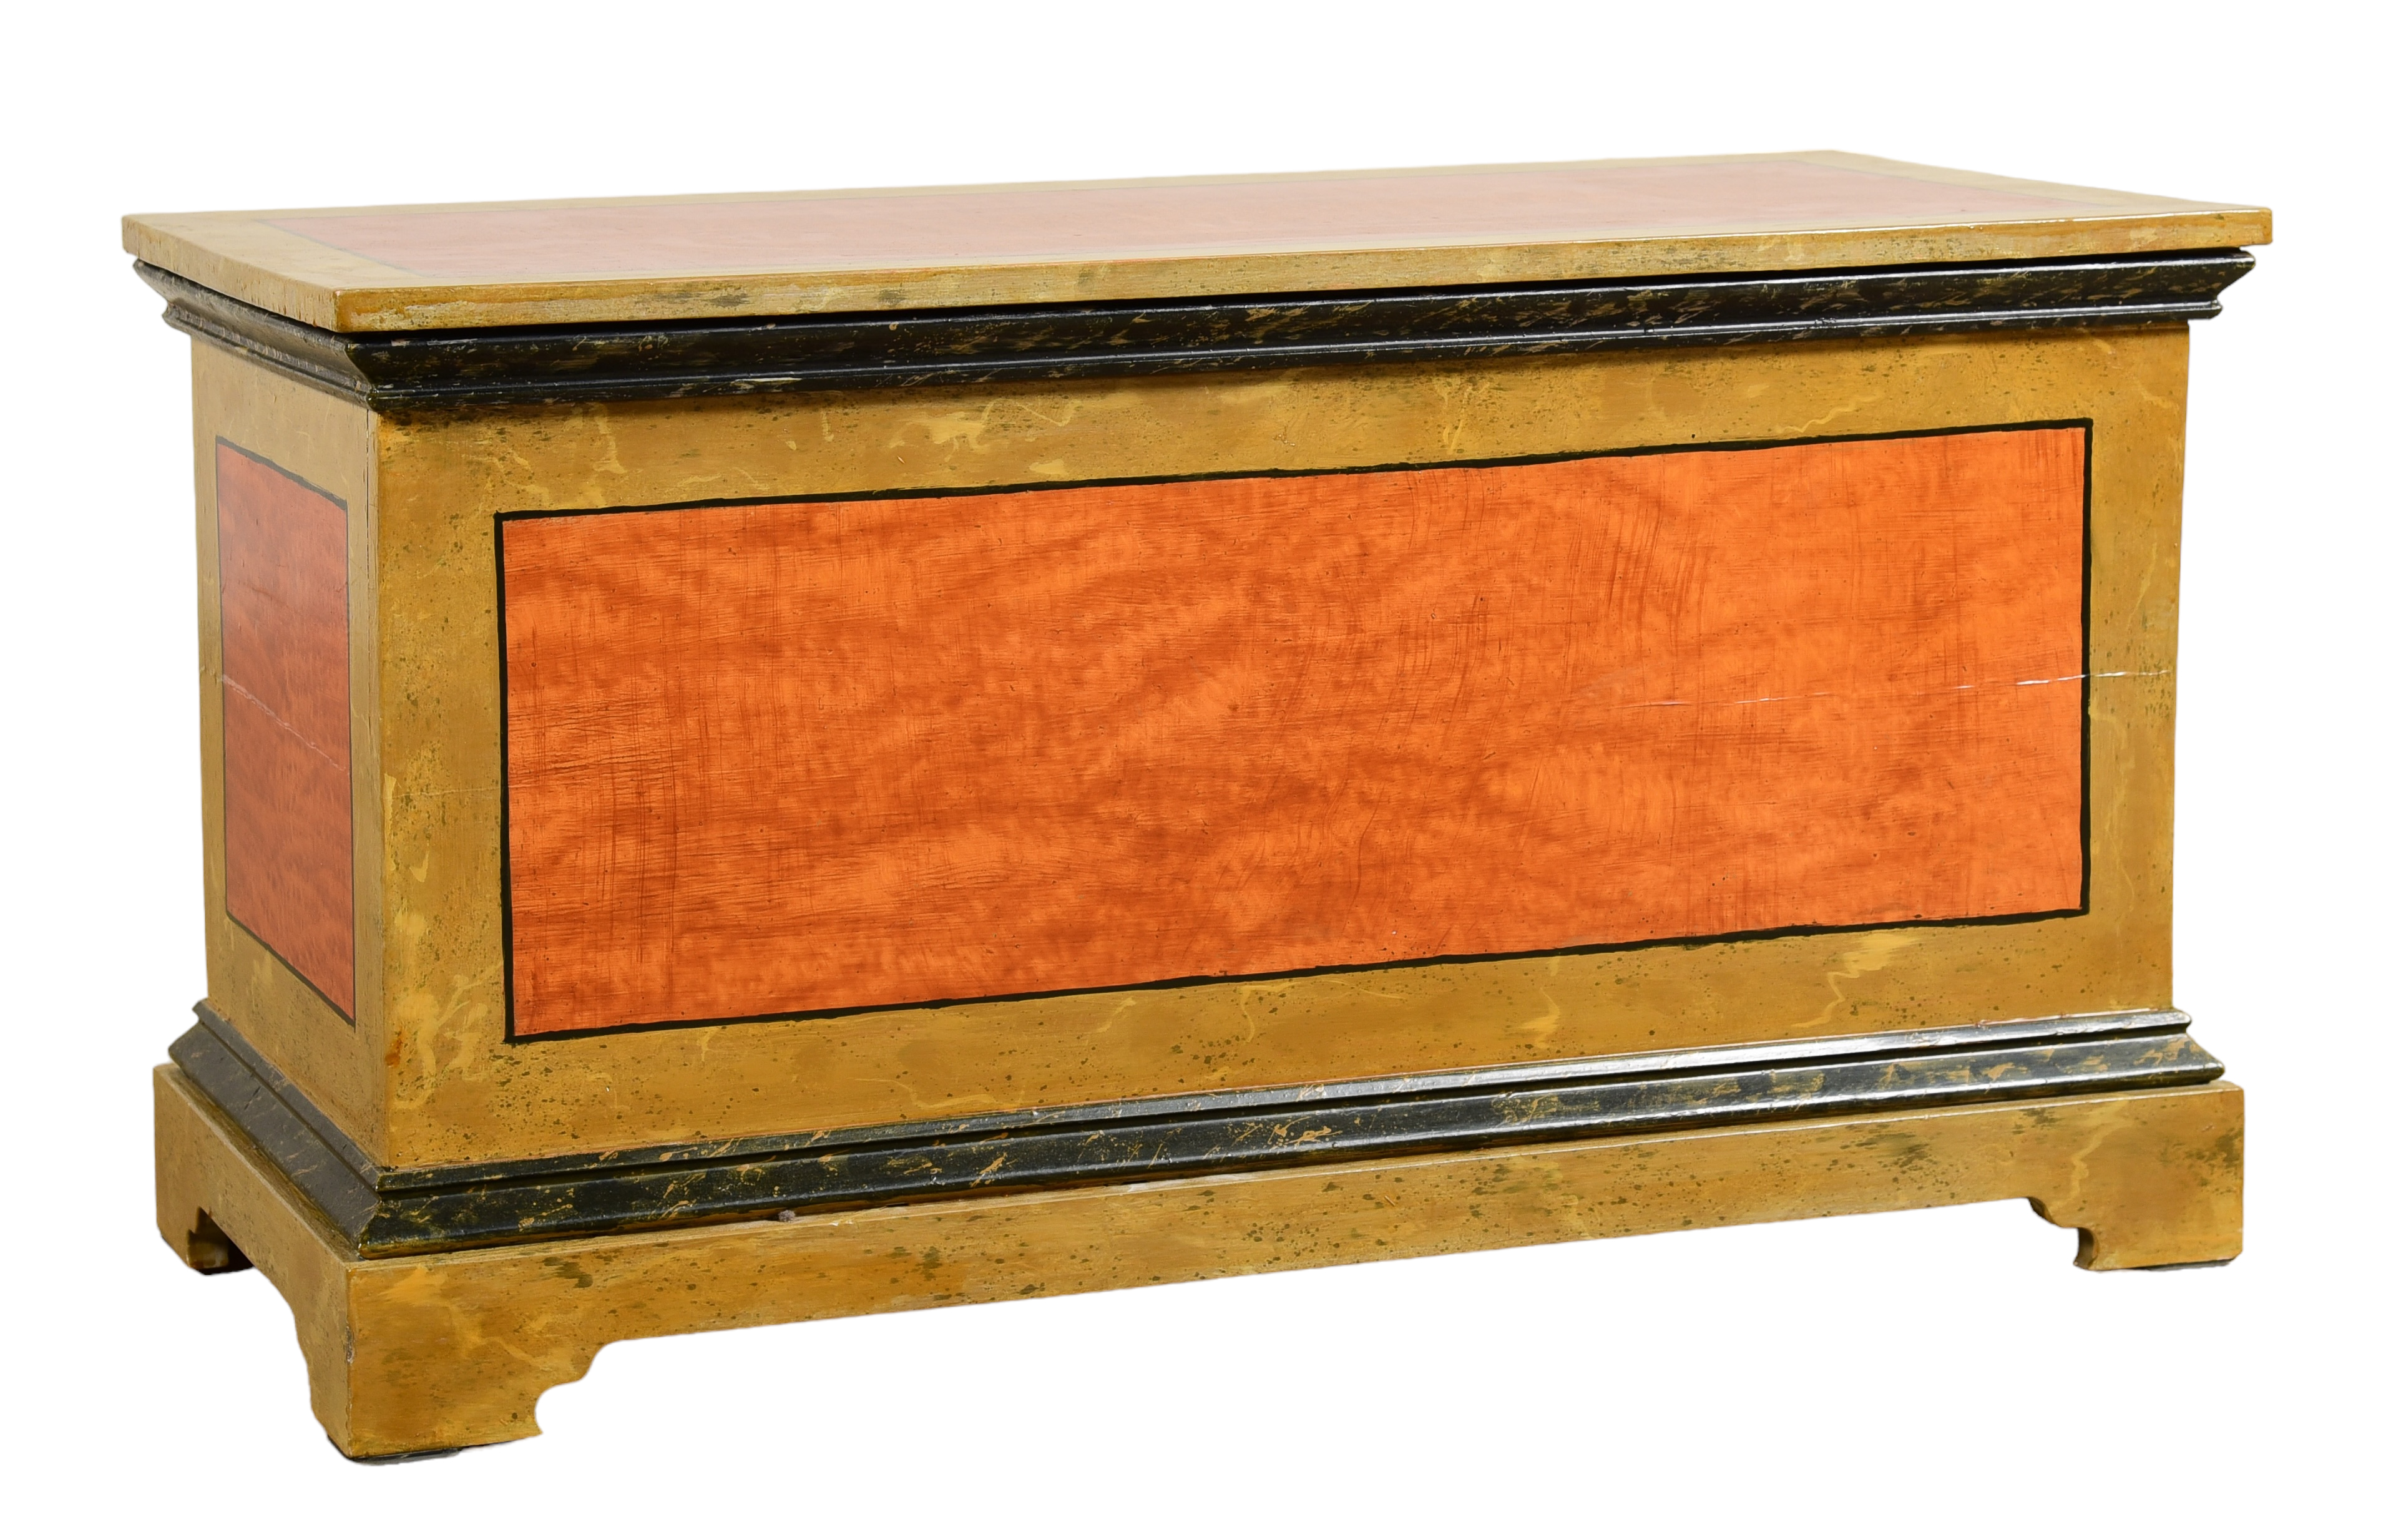 Pine blanket chest, with painted